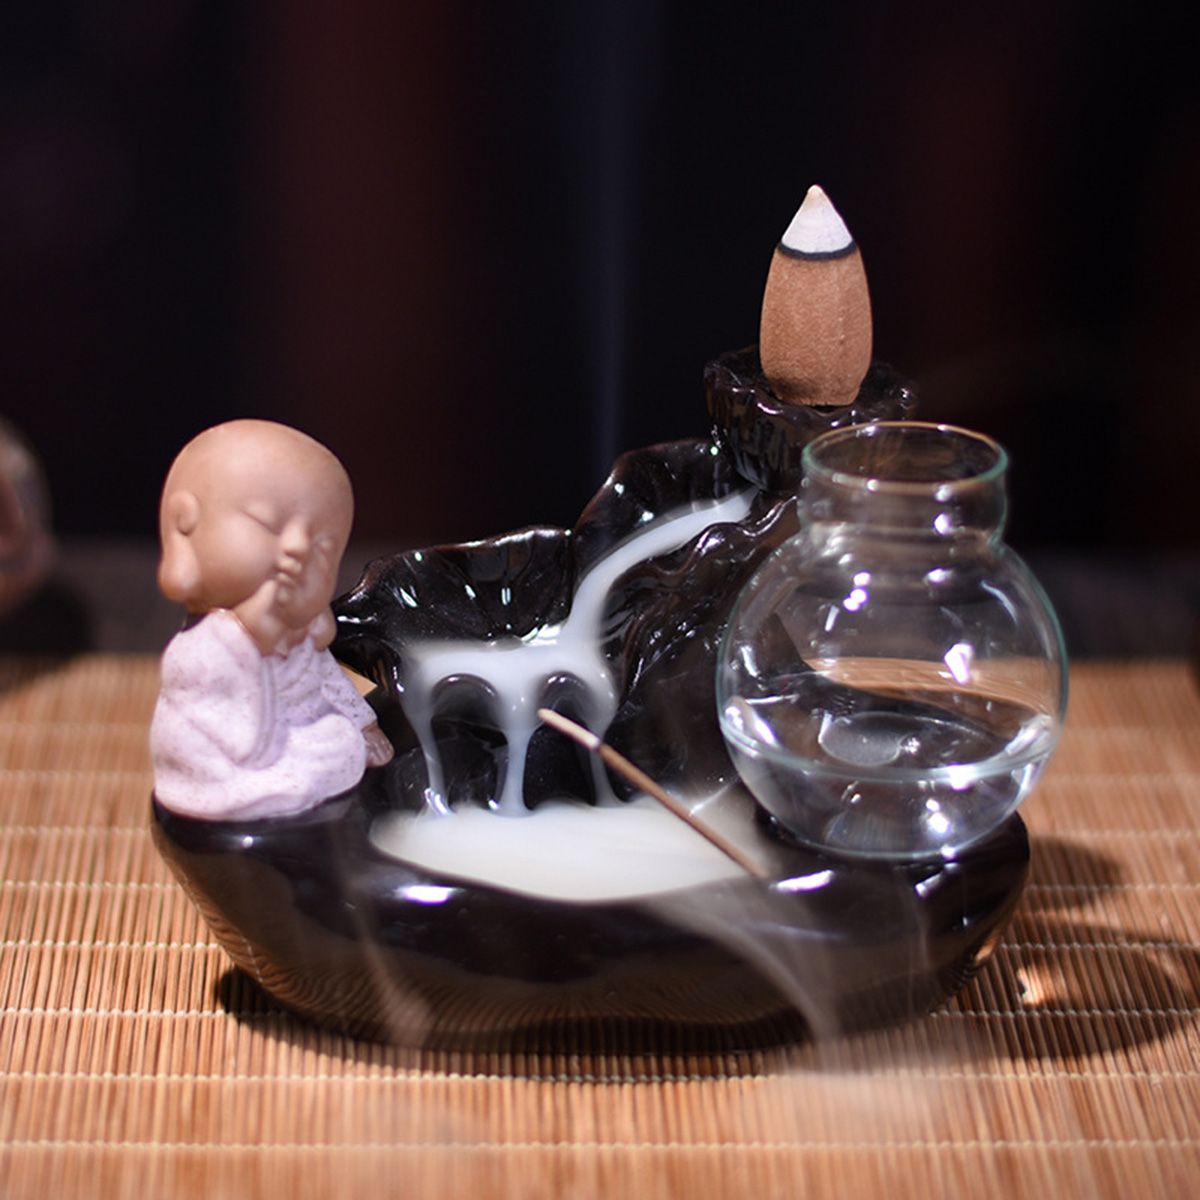 Ceramic-Small-Monk-Back-flow-Incense-Burner-Buddhist-Cone-Censer-Holder-With-Glass-Hydroponic-Pot-1400065